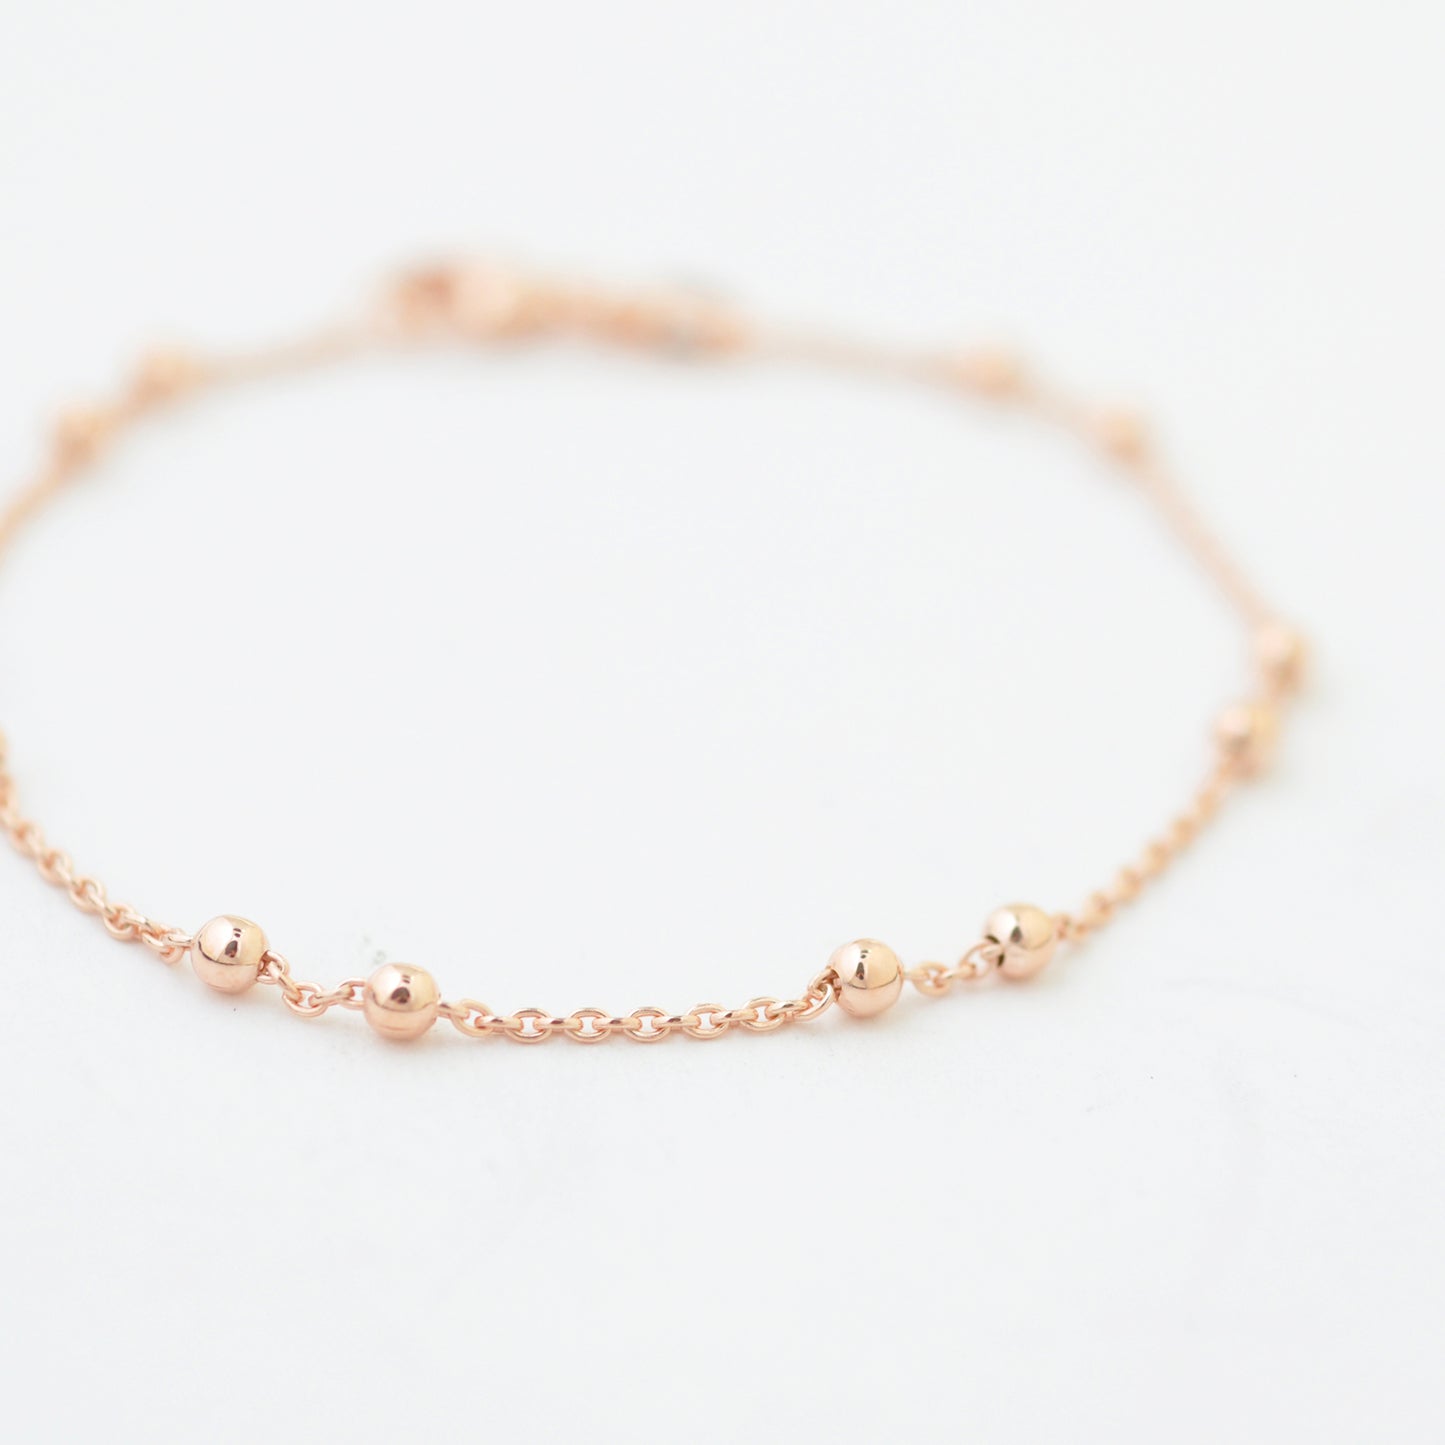 Bracelet pea chain with balls / 925 silver 18k rose gold plated / 16 cm